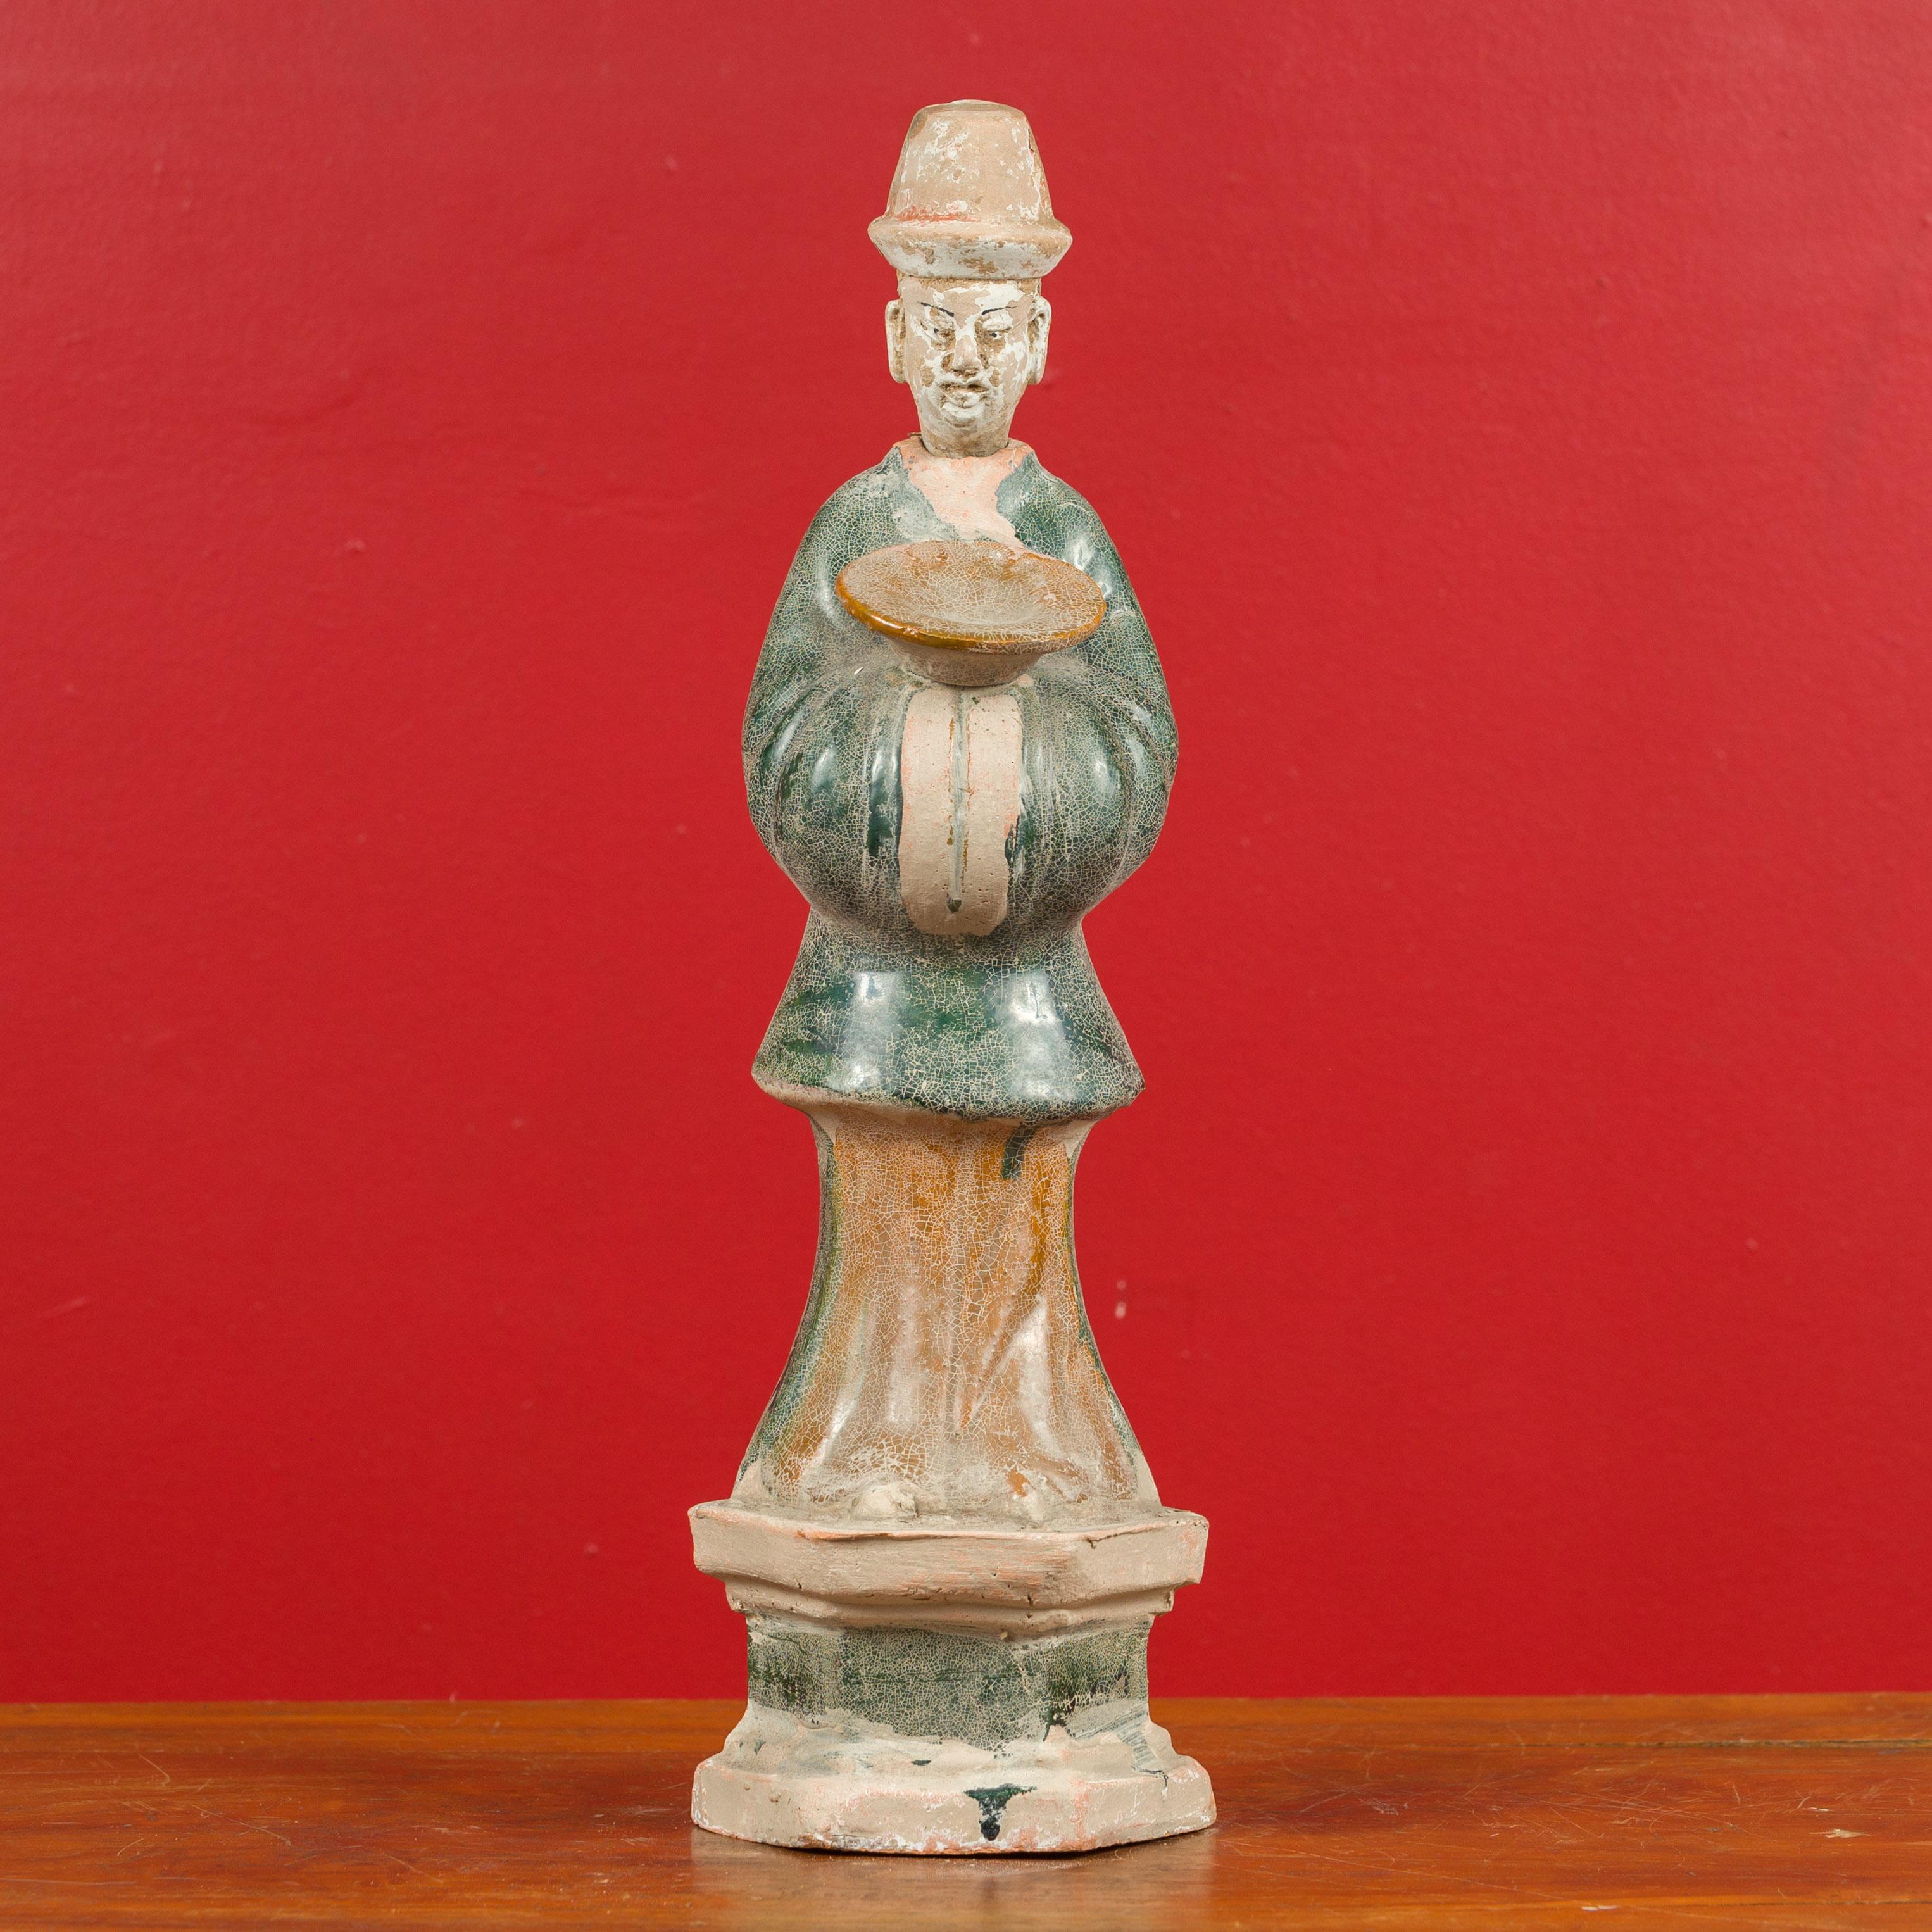 A petite antique Chinese Ming dynasty period glazed terracotta statue from the 17th century, depicting an official holding a bowl. Presenting a nice patina, this Ming Dynasty statue attracts our attention with its green, russet, black and white